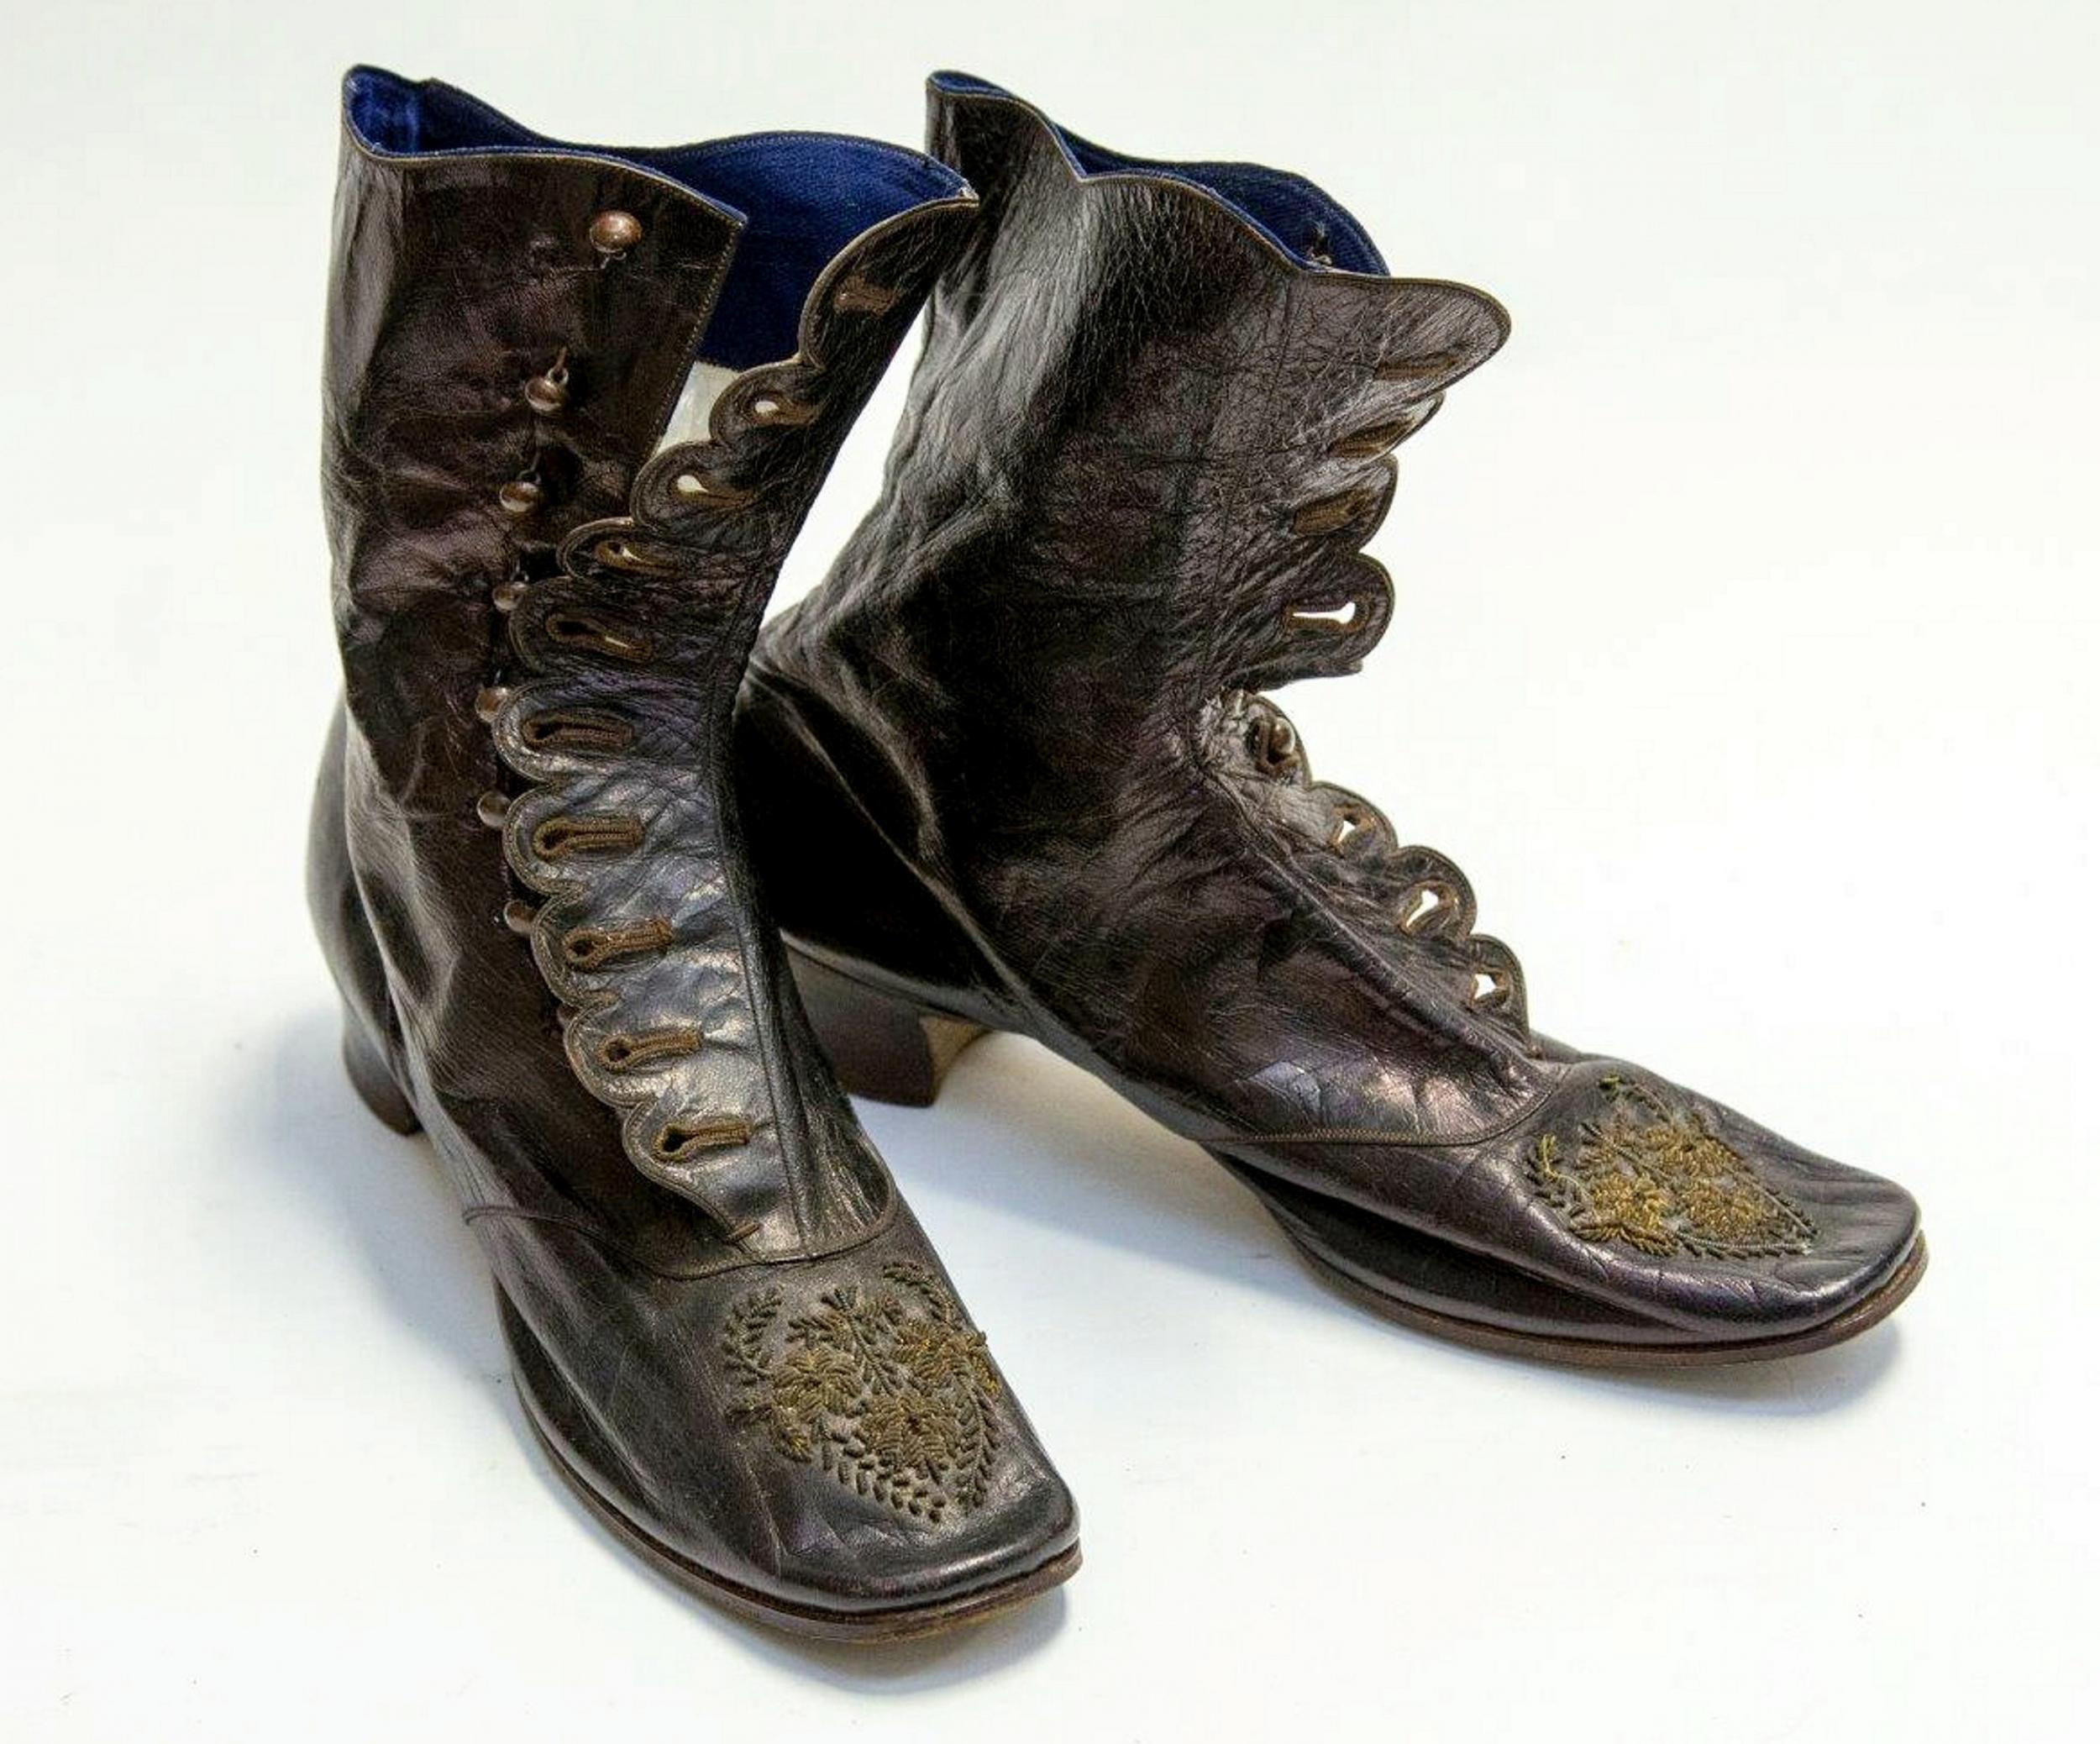 Queen Victoria's boots were made by J Sparks-Hall of London (SWNS)